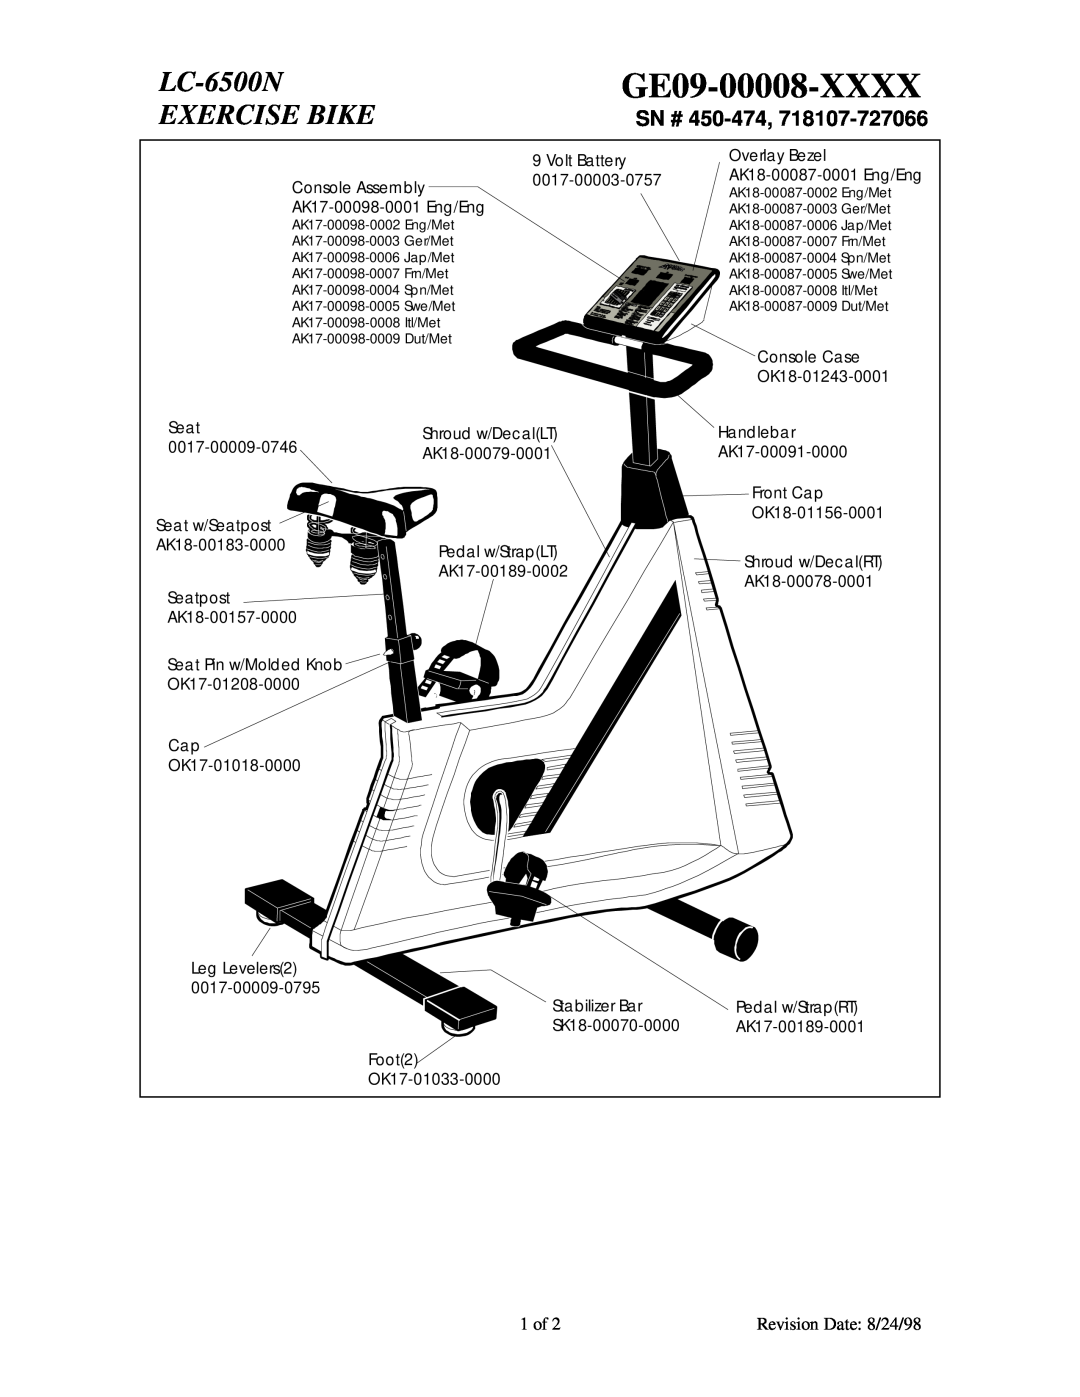 Life Fitness LC-6500N manual GE09-00008-XXXX, Exercise Bike, SN # 450-474, 1 of, Revision Date 8/24/98 